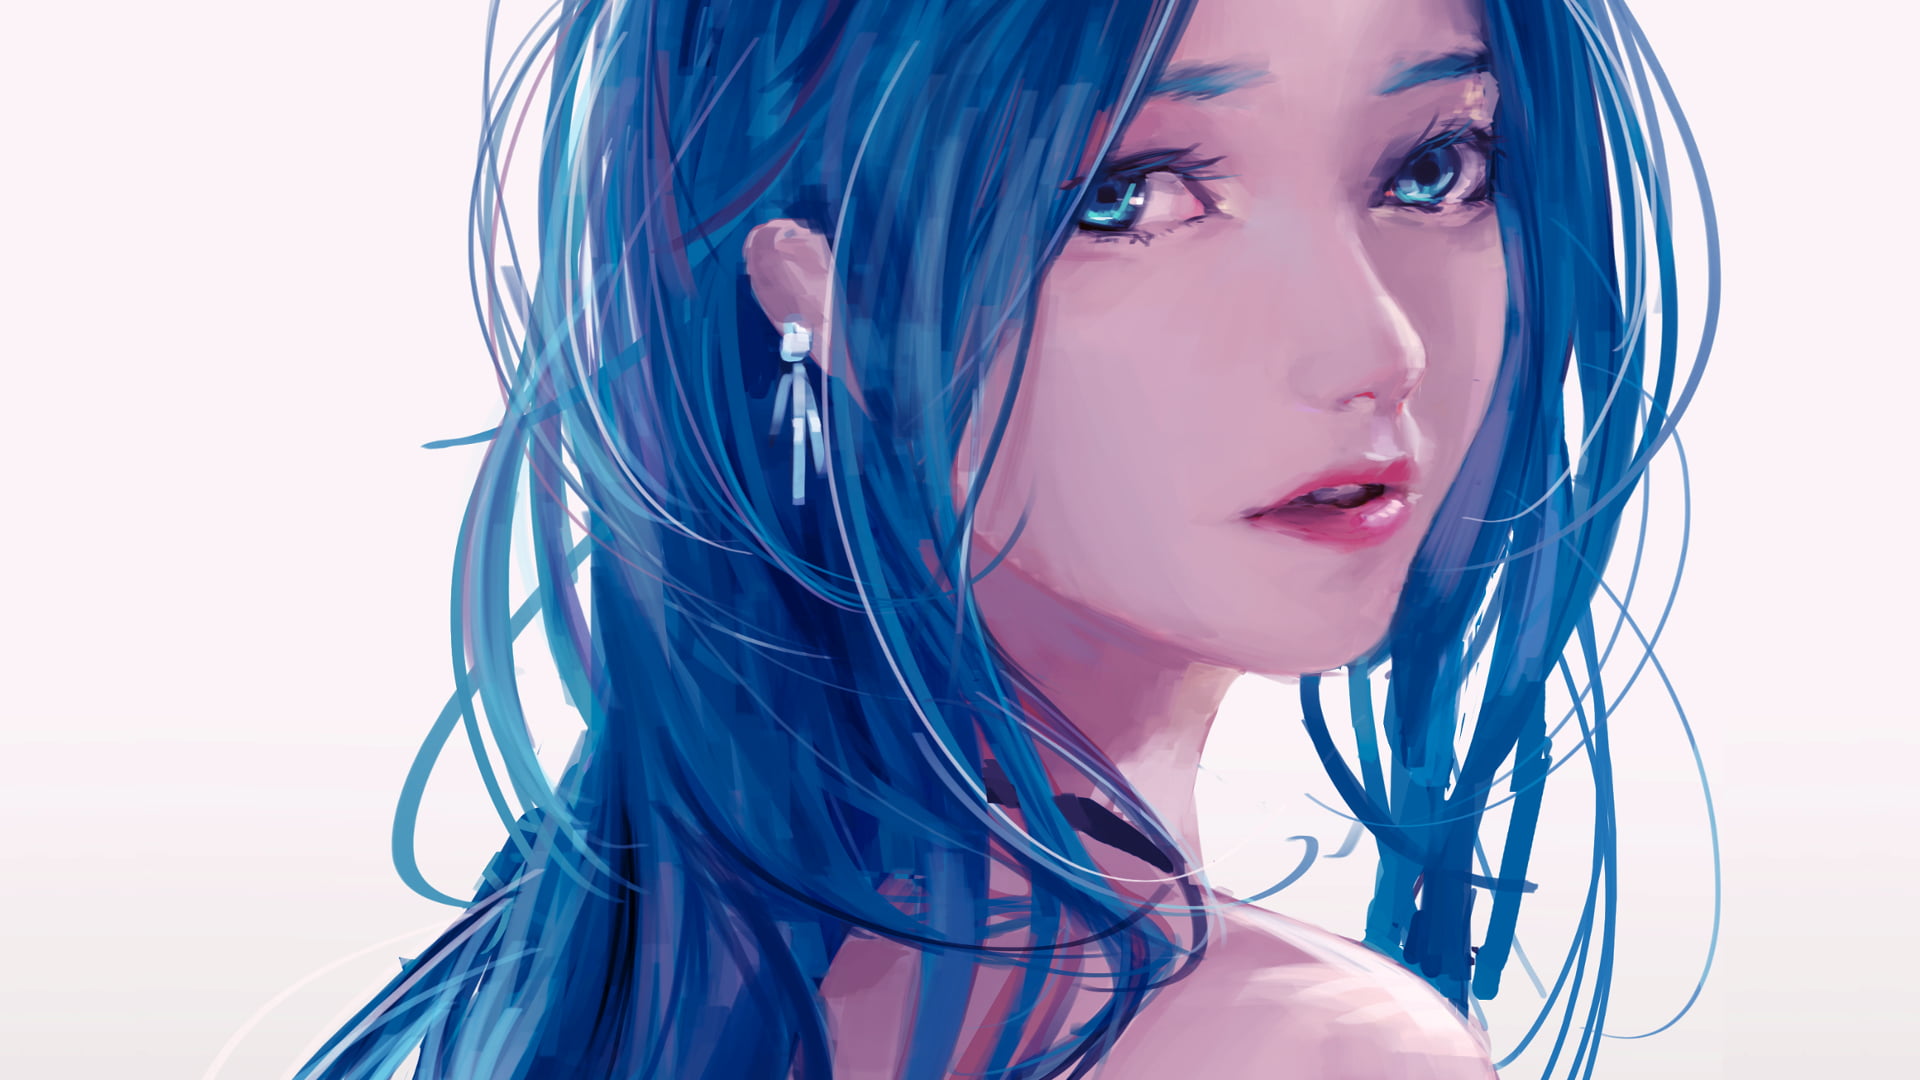 1. Blue-haired girl in Sims 4 digital art - wide 10